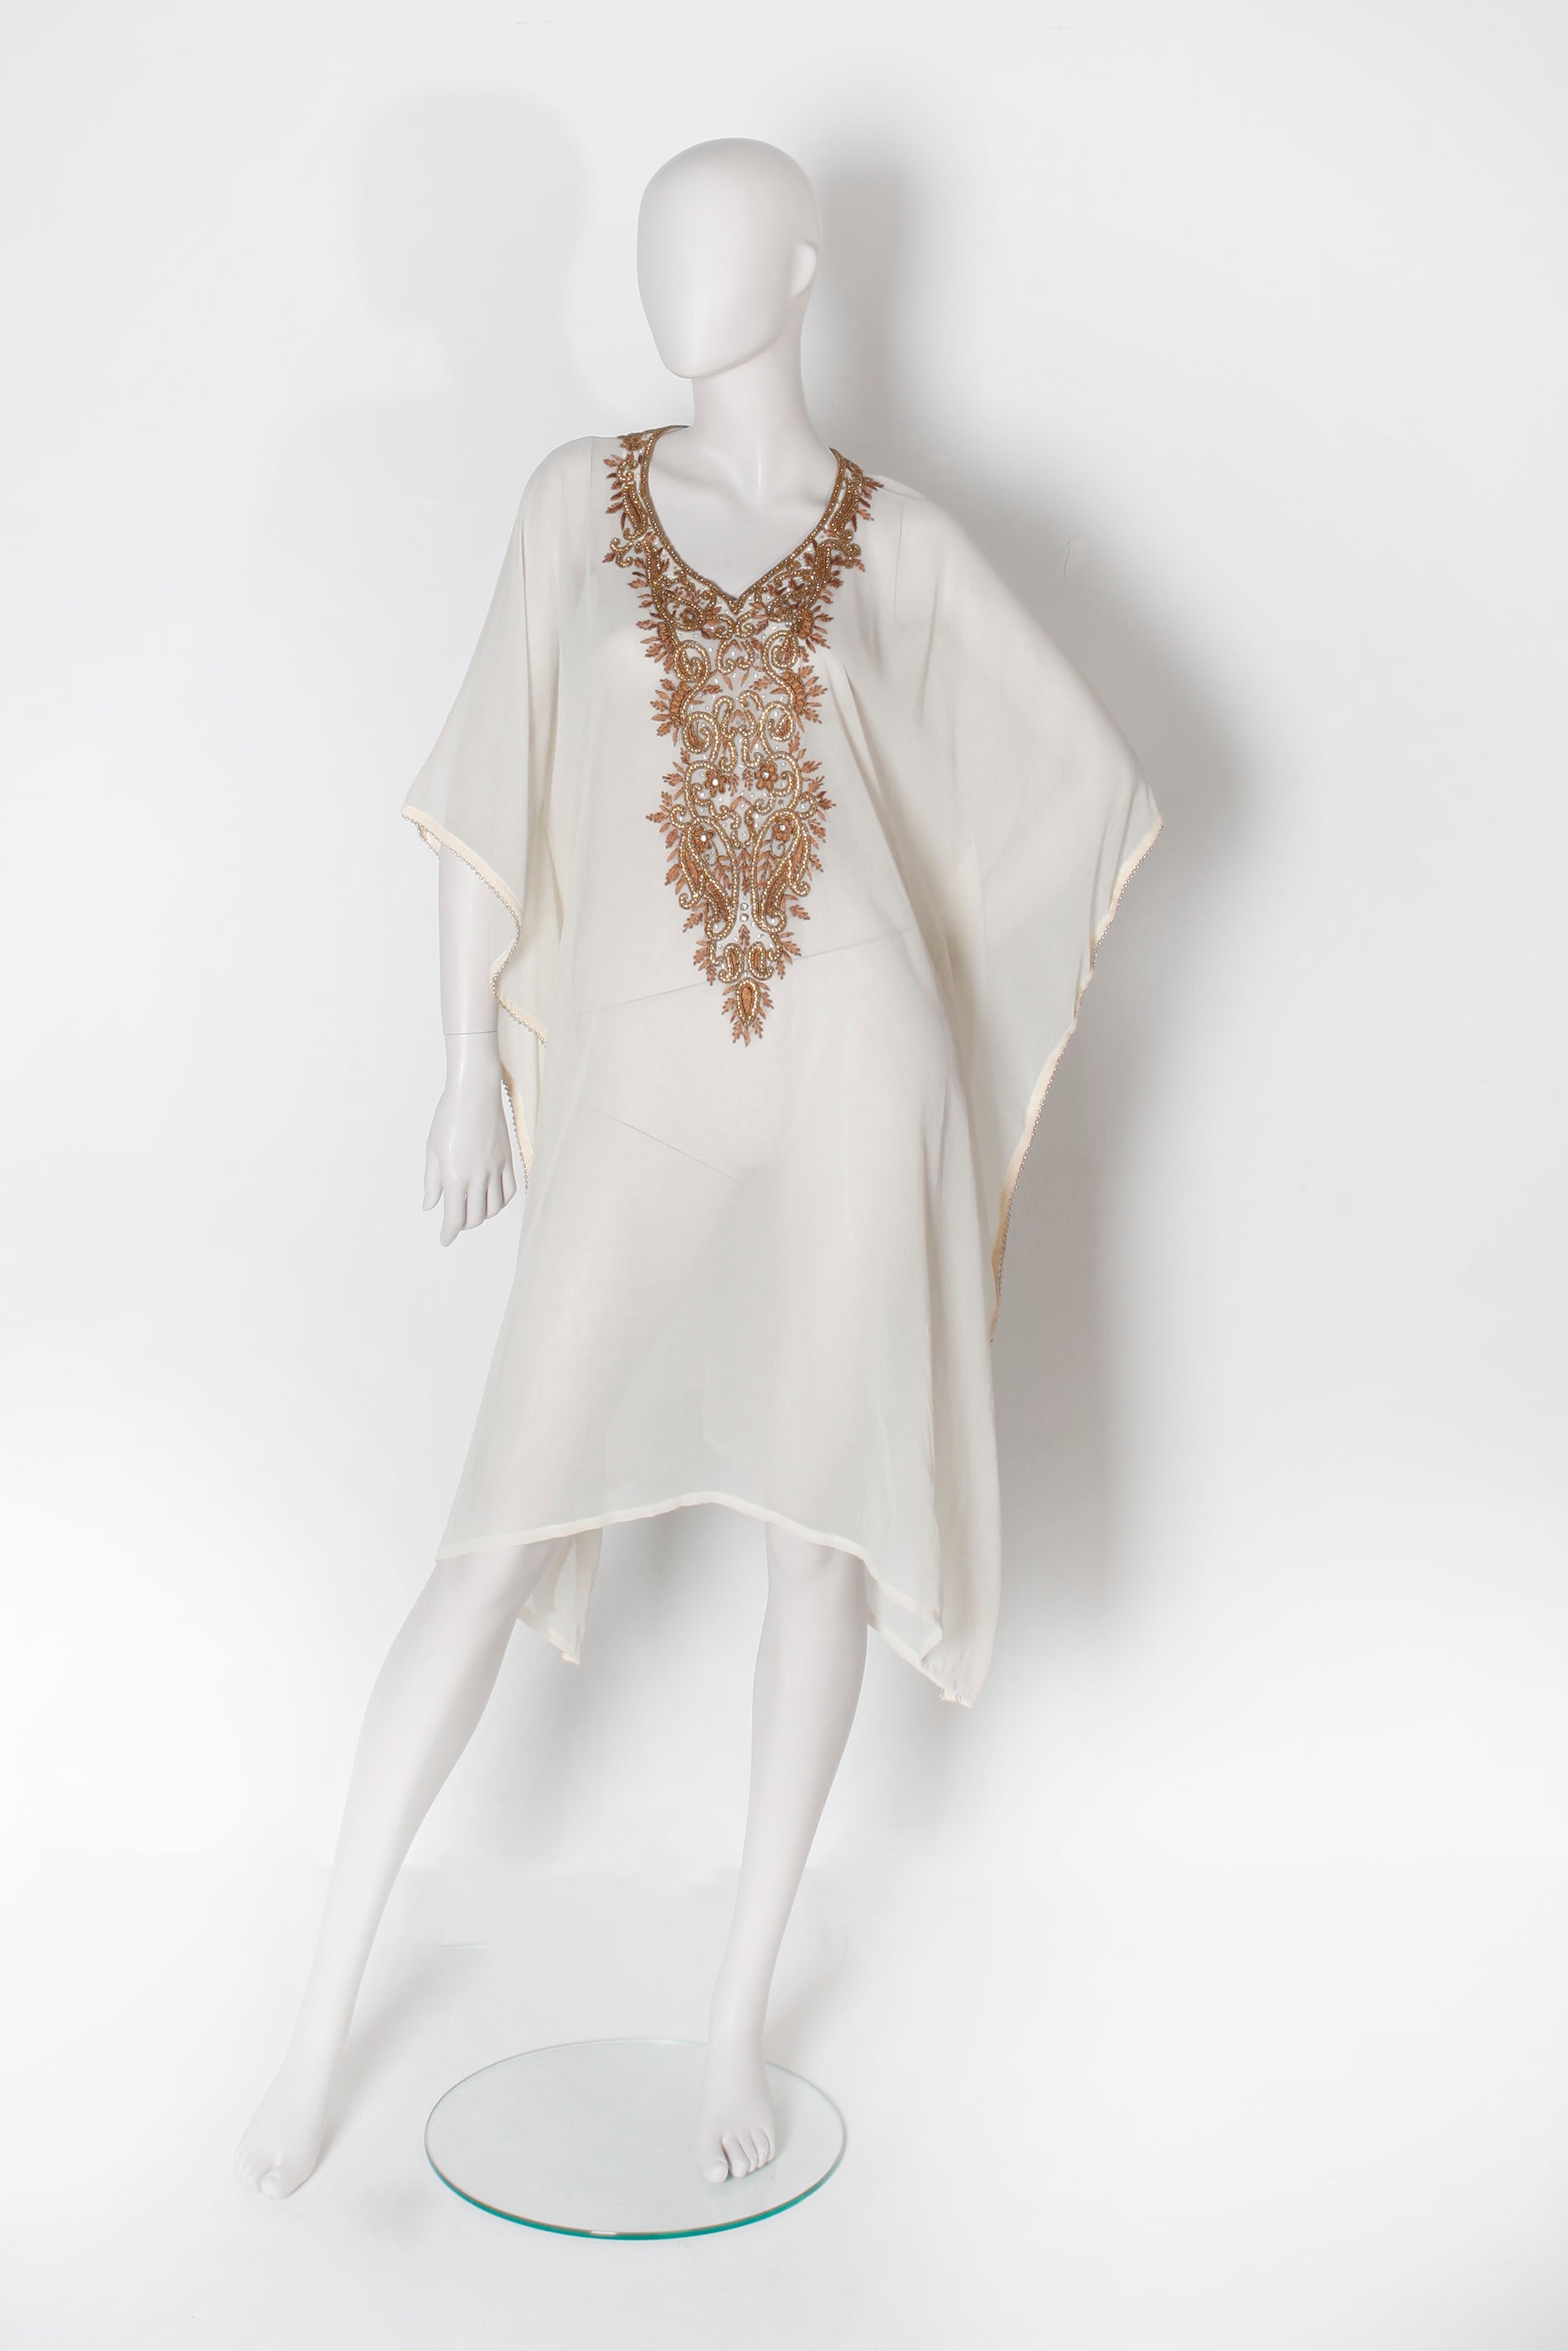 Off-White Kaftan with Gold Embroidery